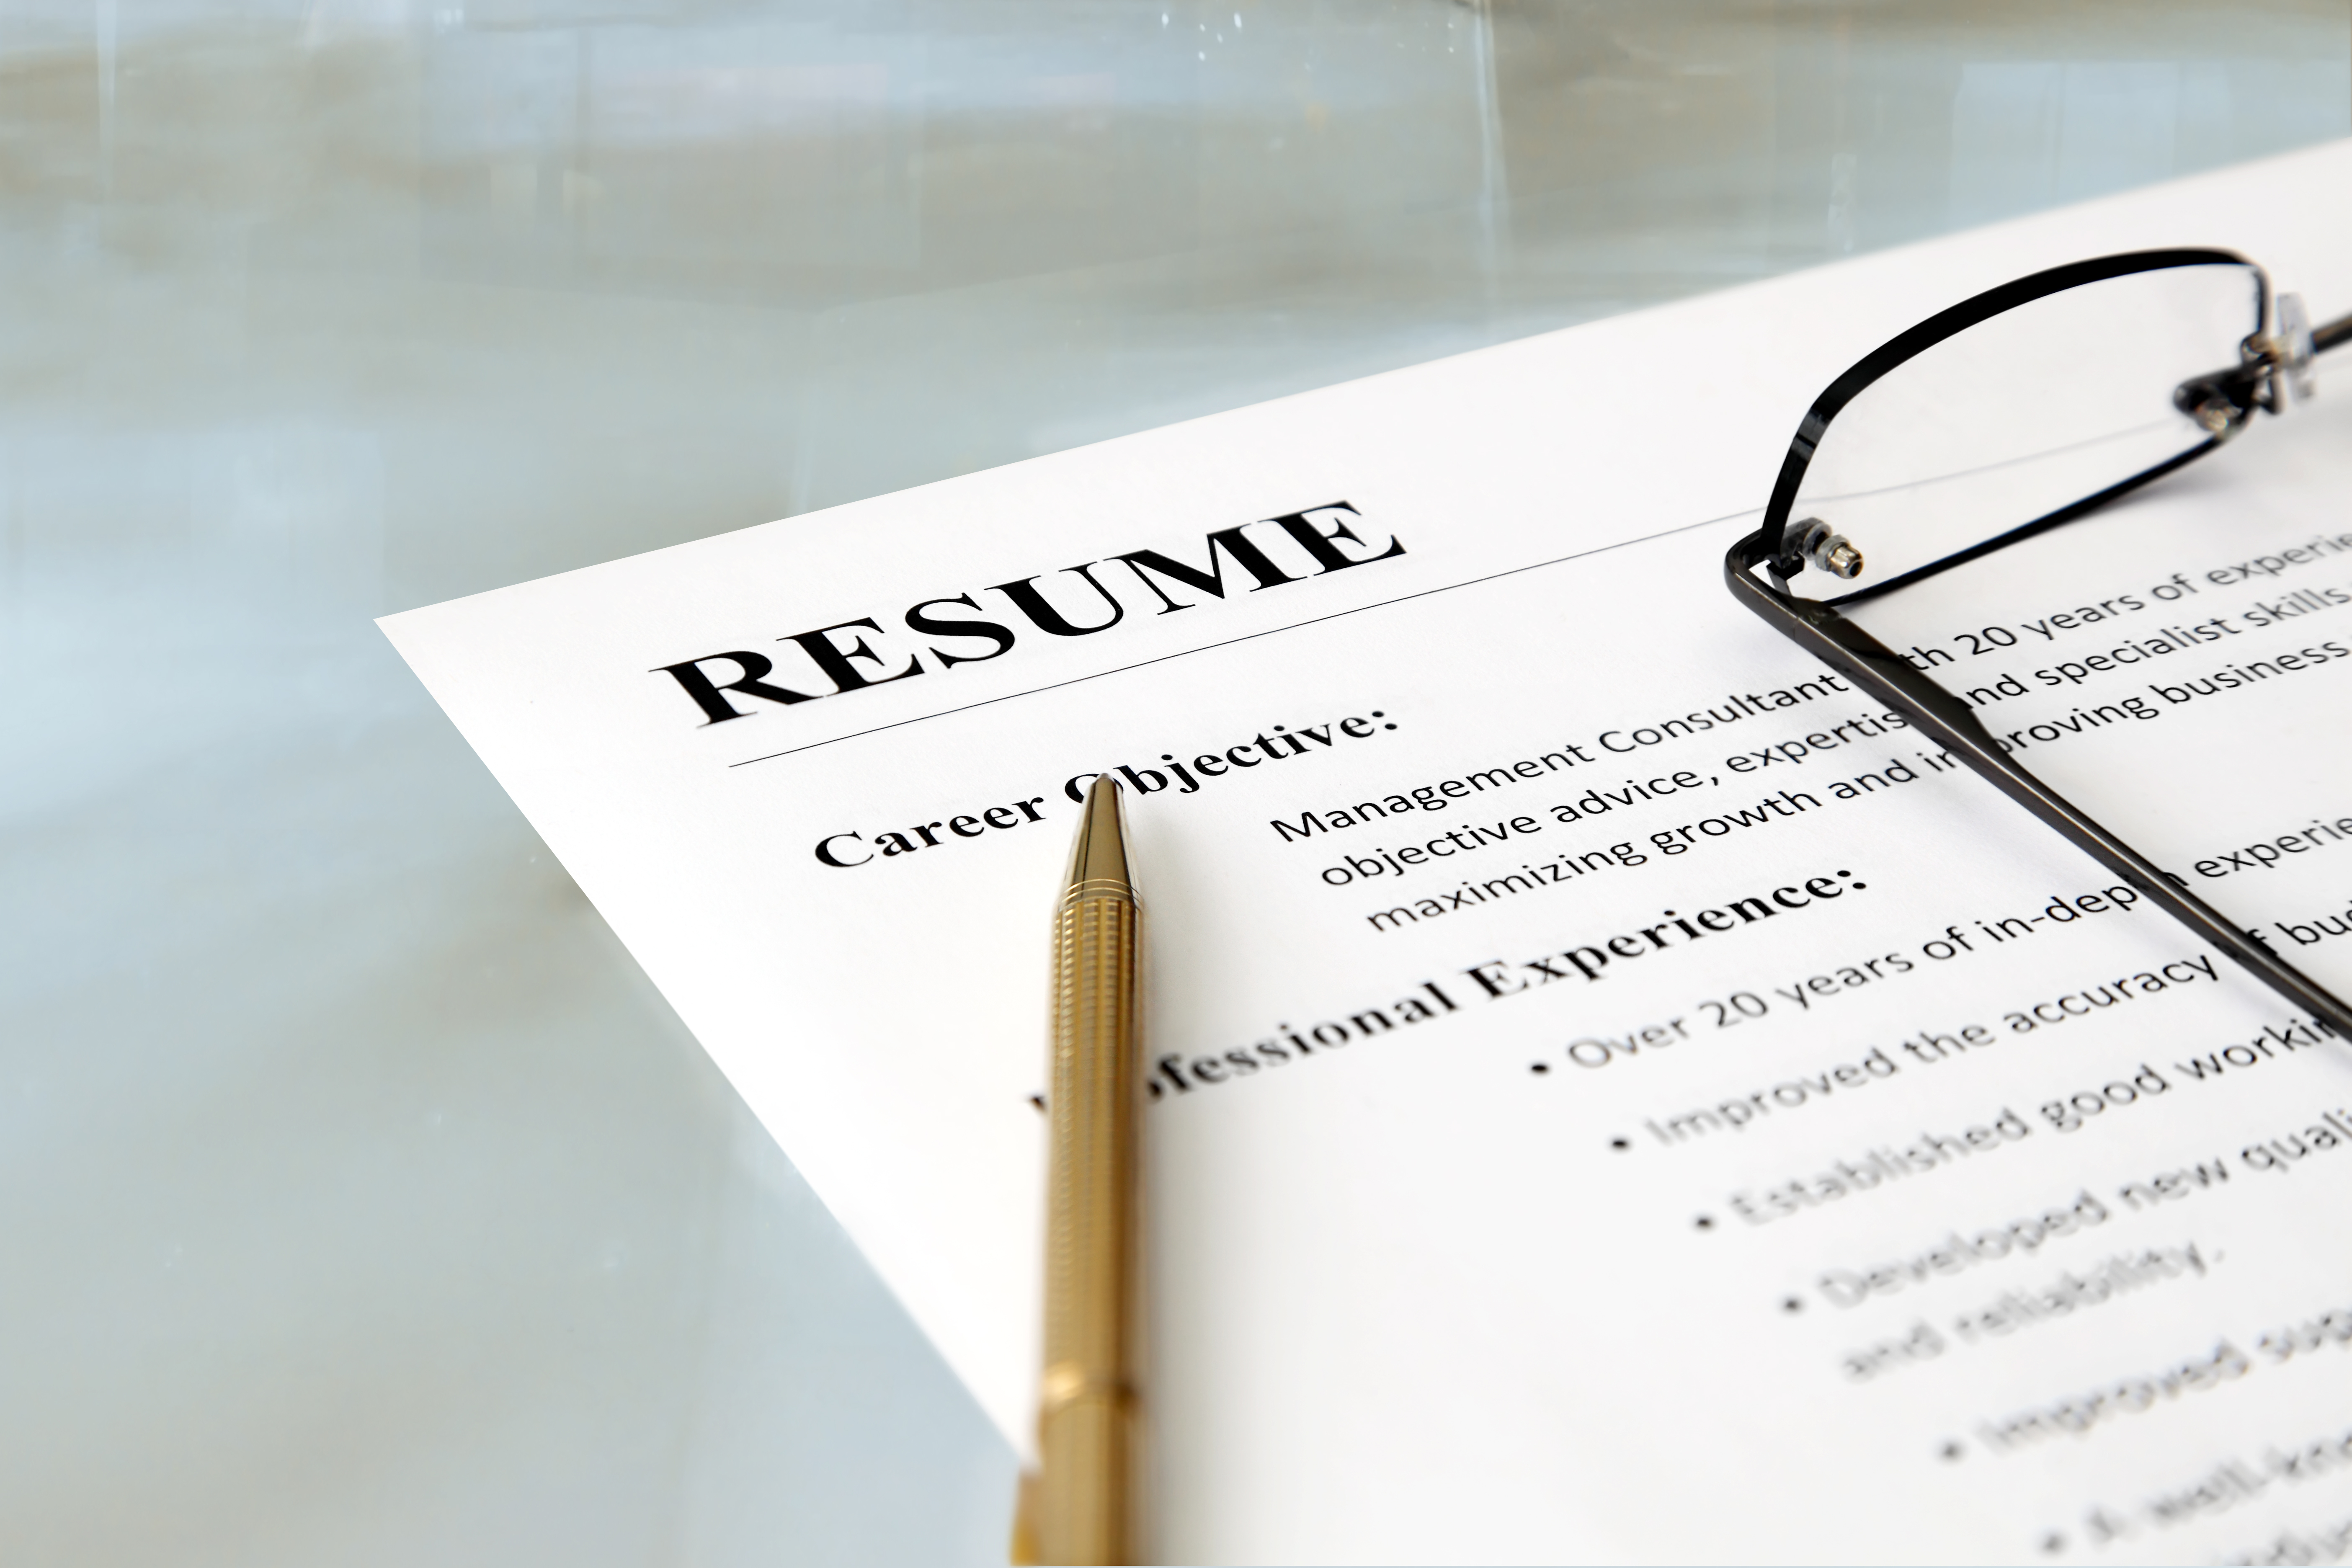 executive management resume services and interview coaching